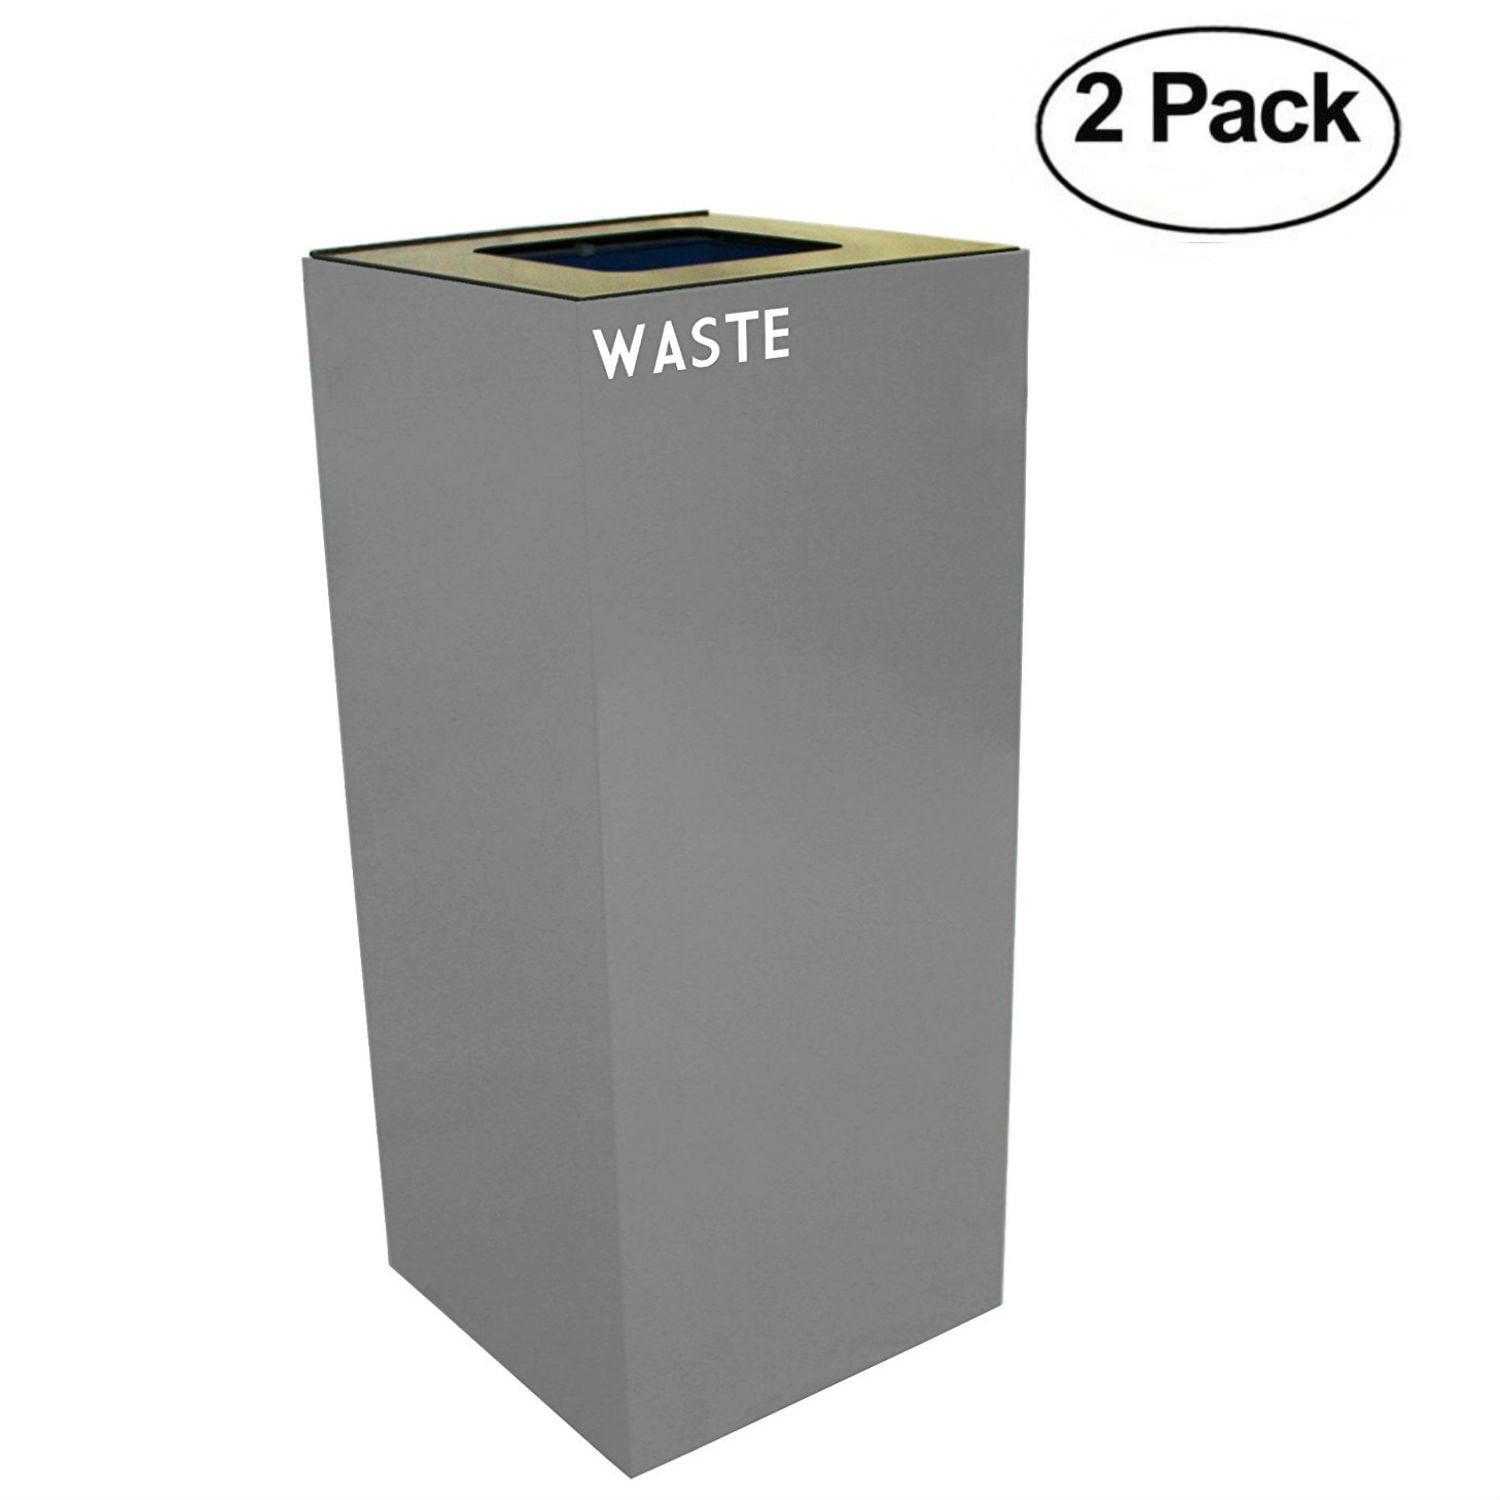 Witt Industries GeoCube Recycling Receptacle Waste Container 